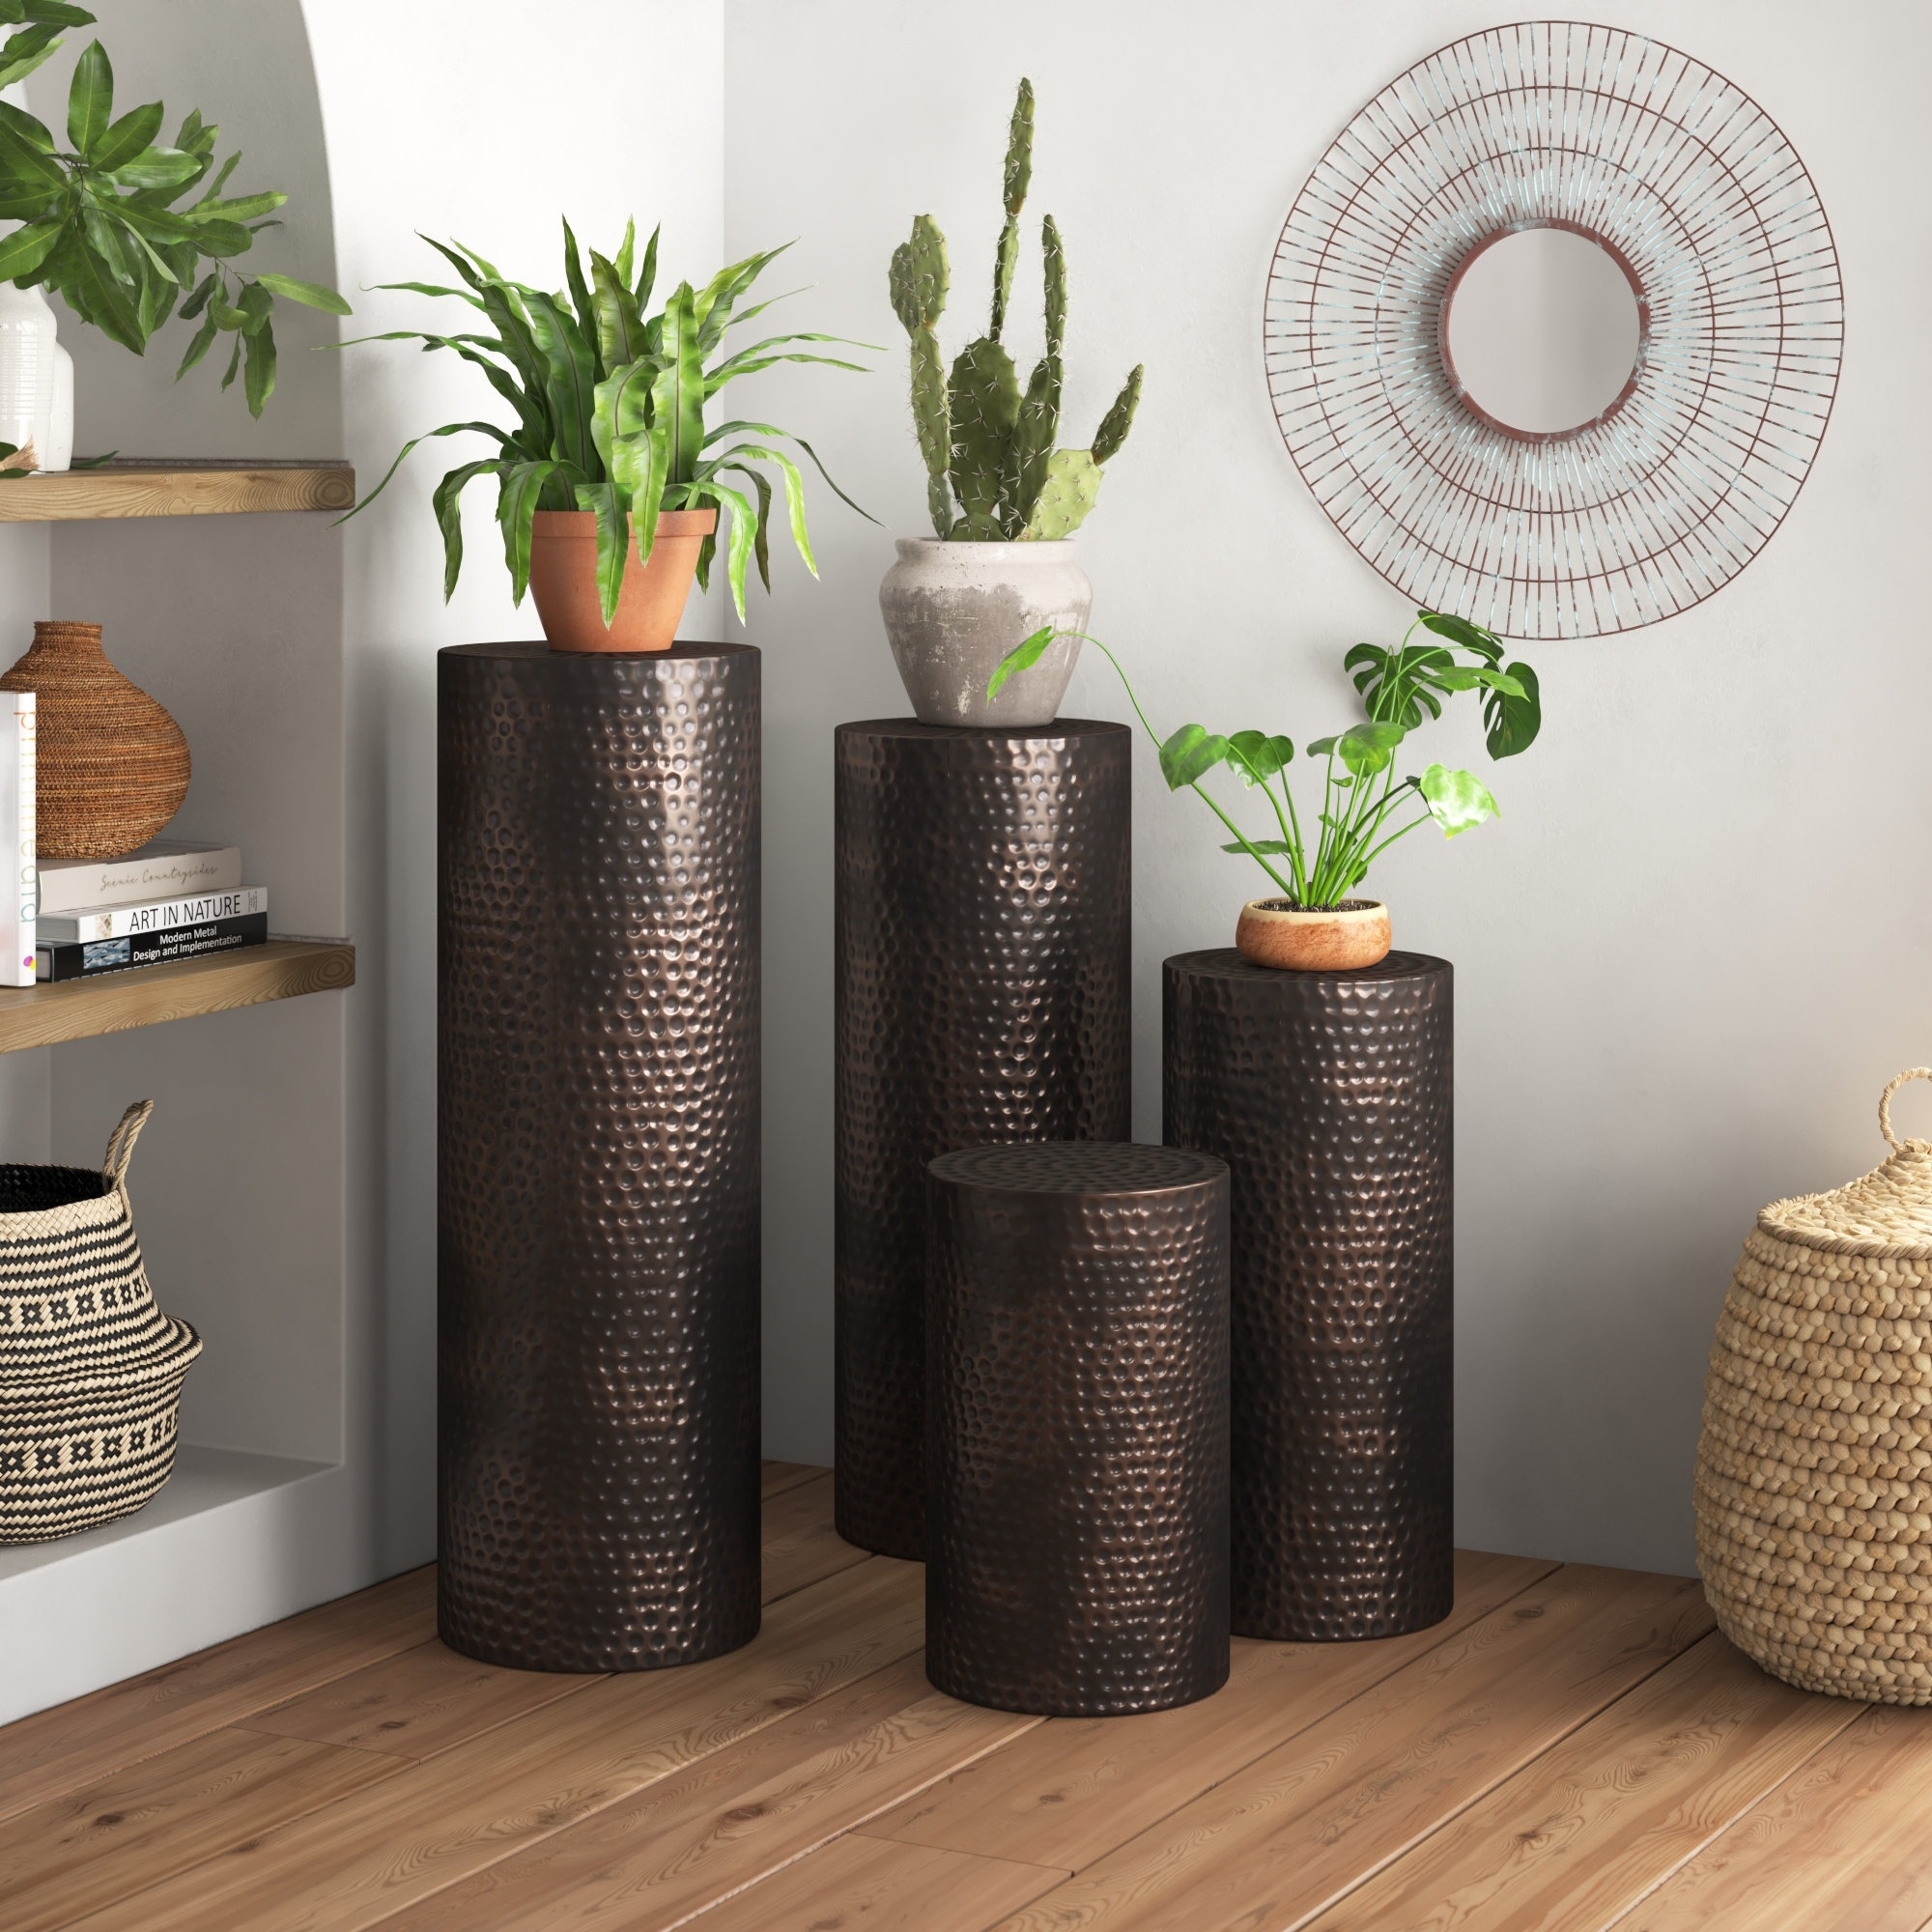 Assorted tall, cylindrical wicker plant stands with green potted plants, in a home interior setting for shopping decor